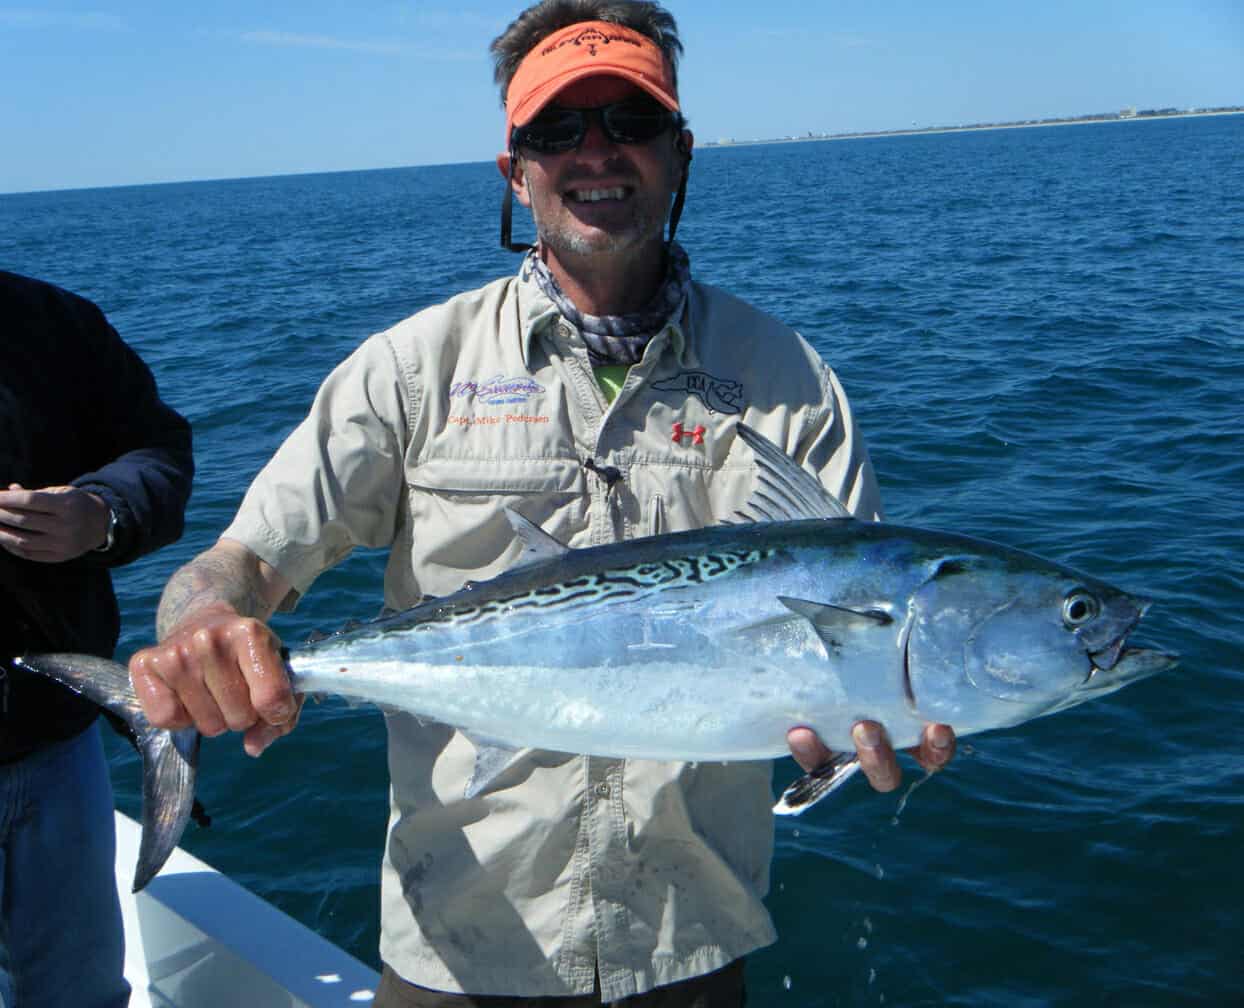 Capt Mike Fishing - NX Fishing Charters - Riley Rods - Team North Fork Composites 18